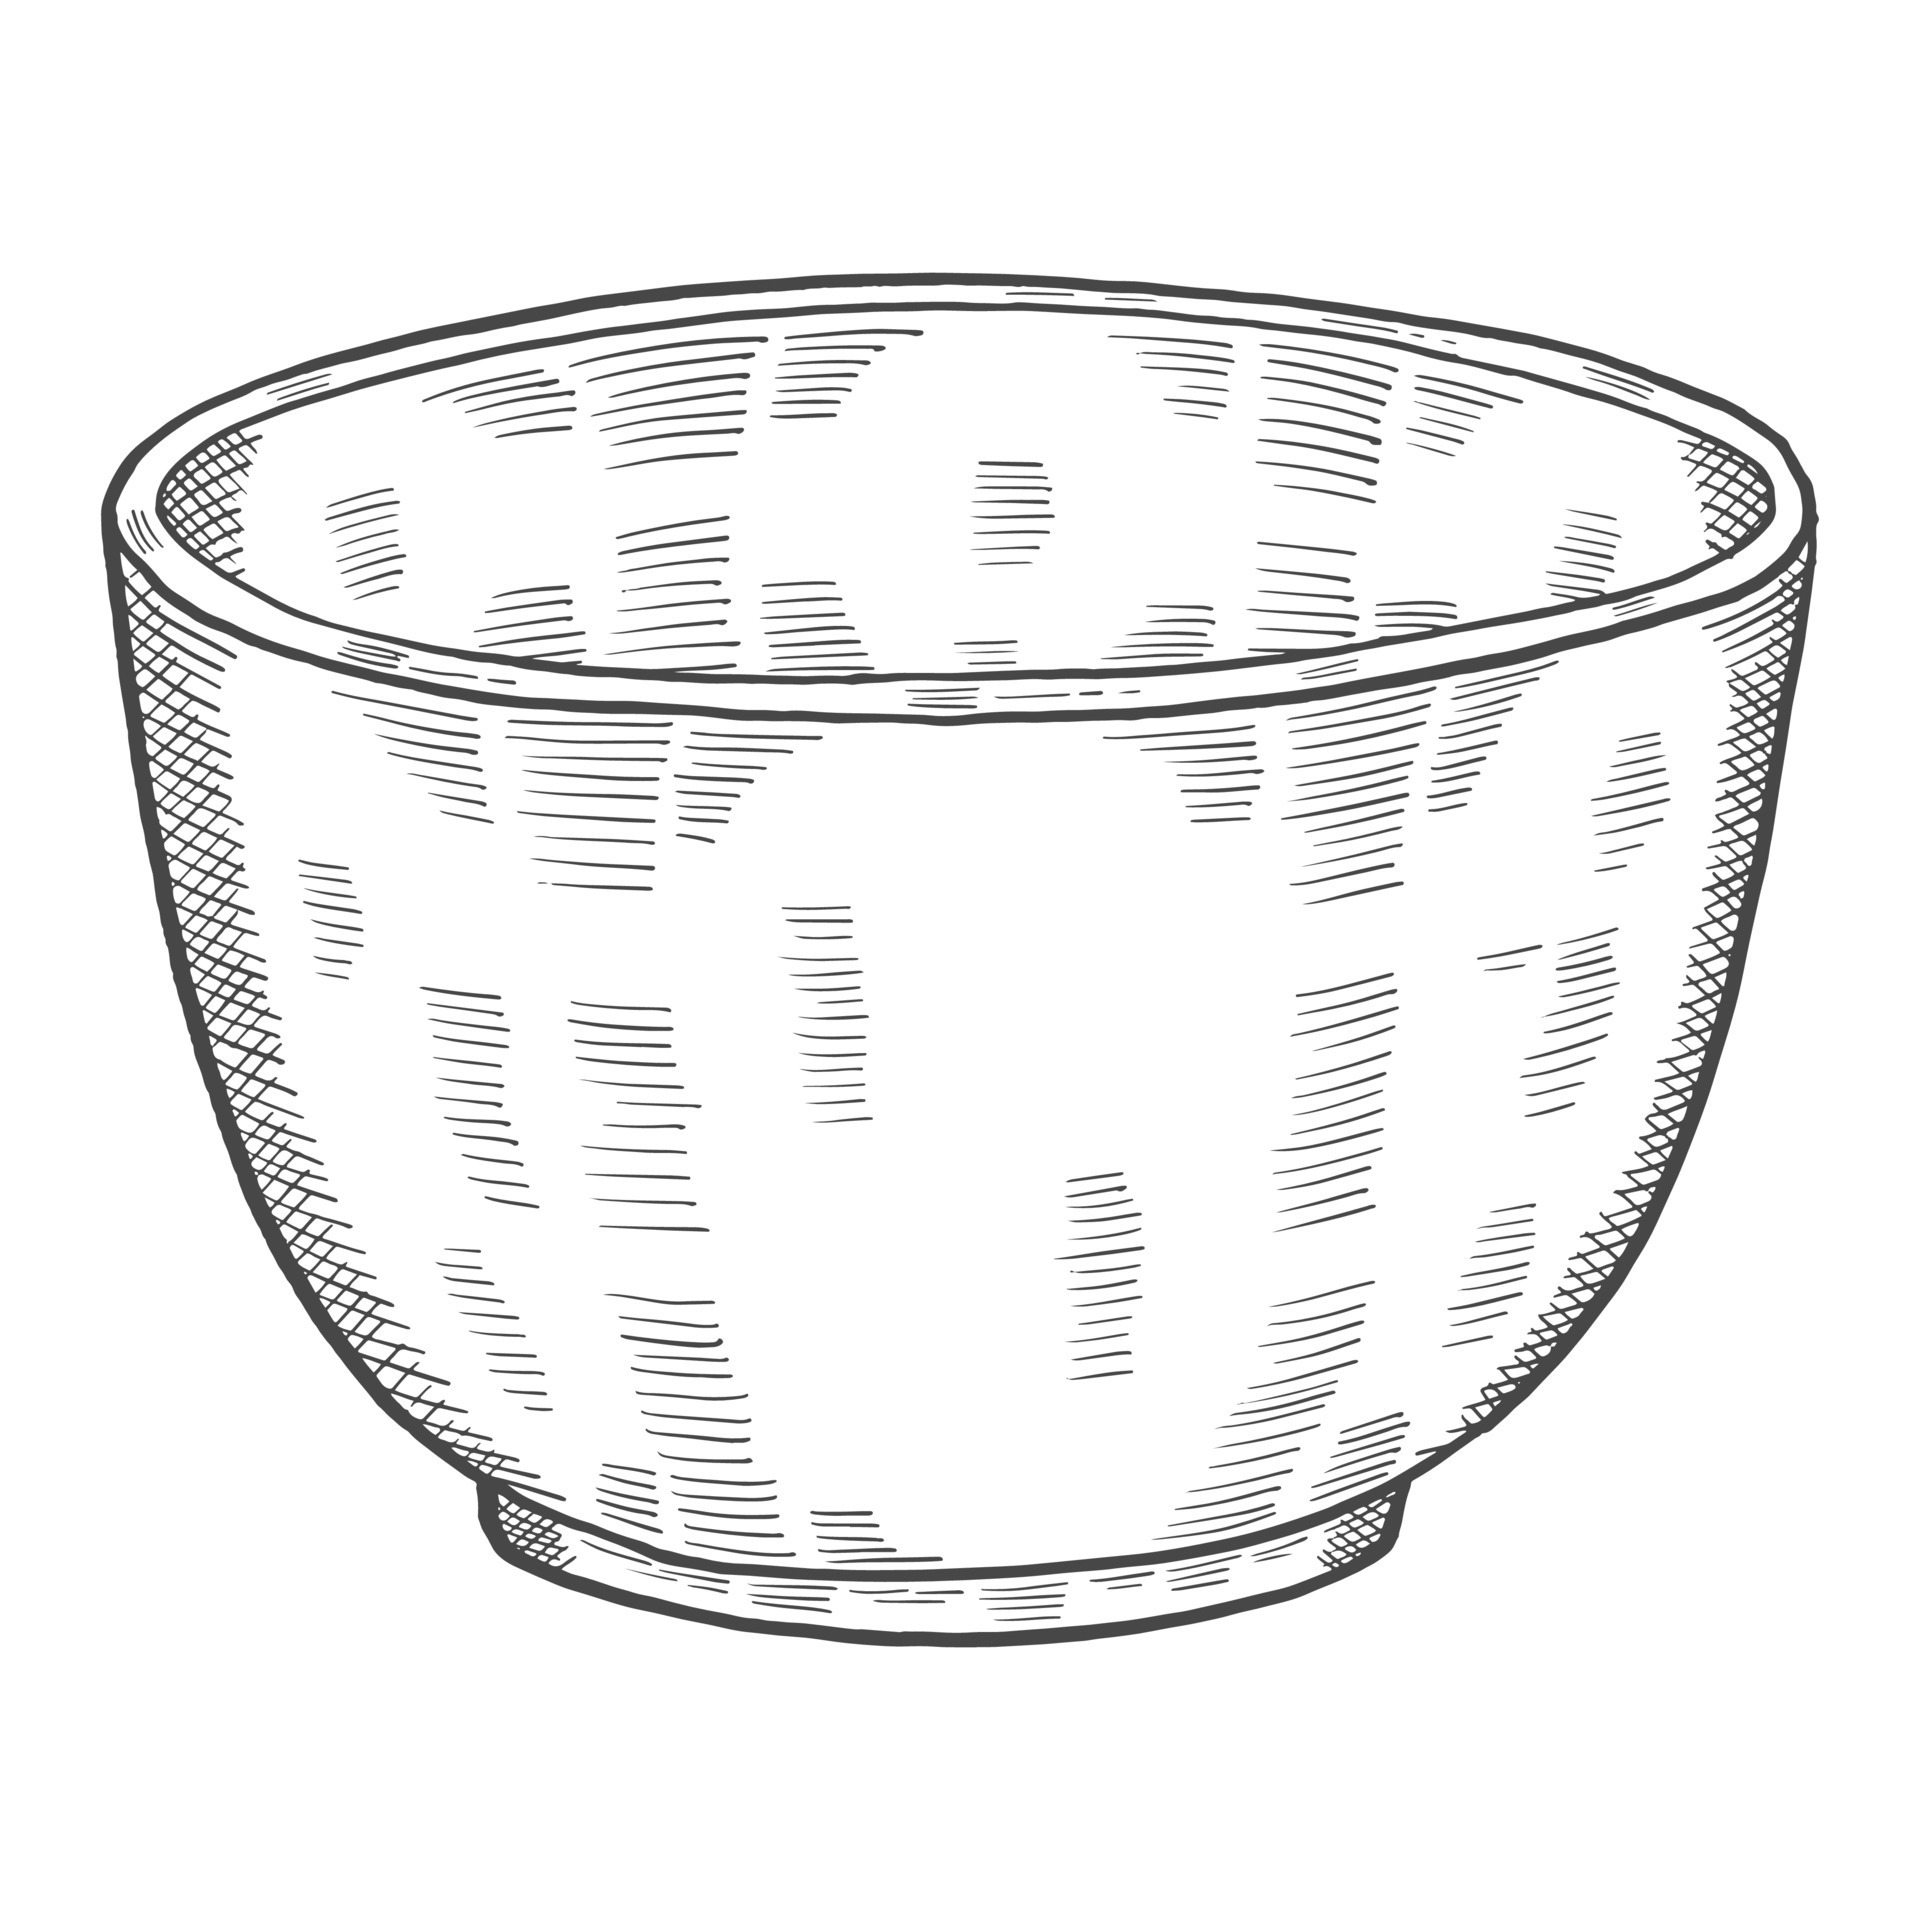 How to Sketch a Bowl  YouTube